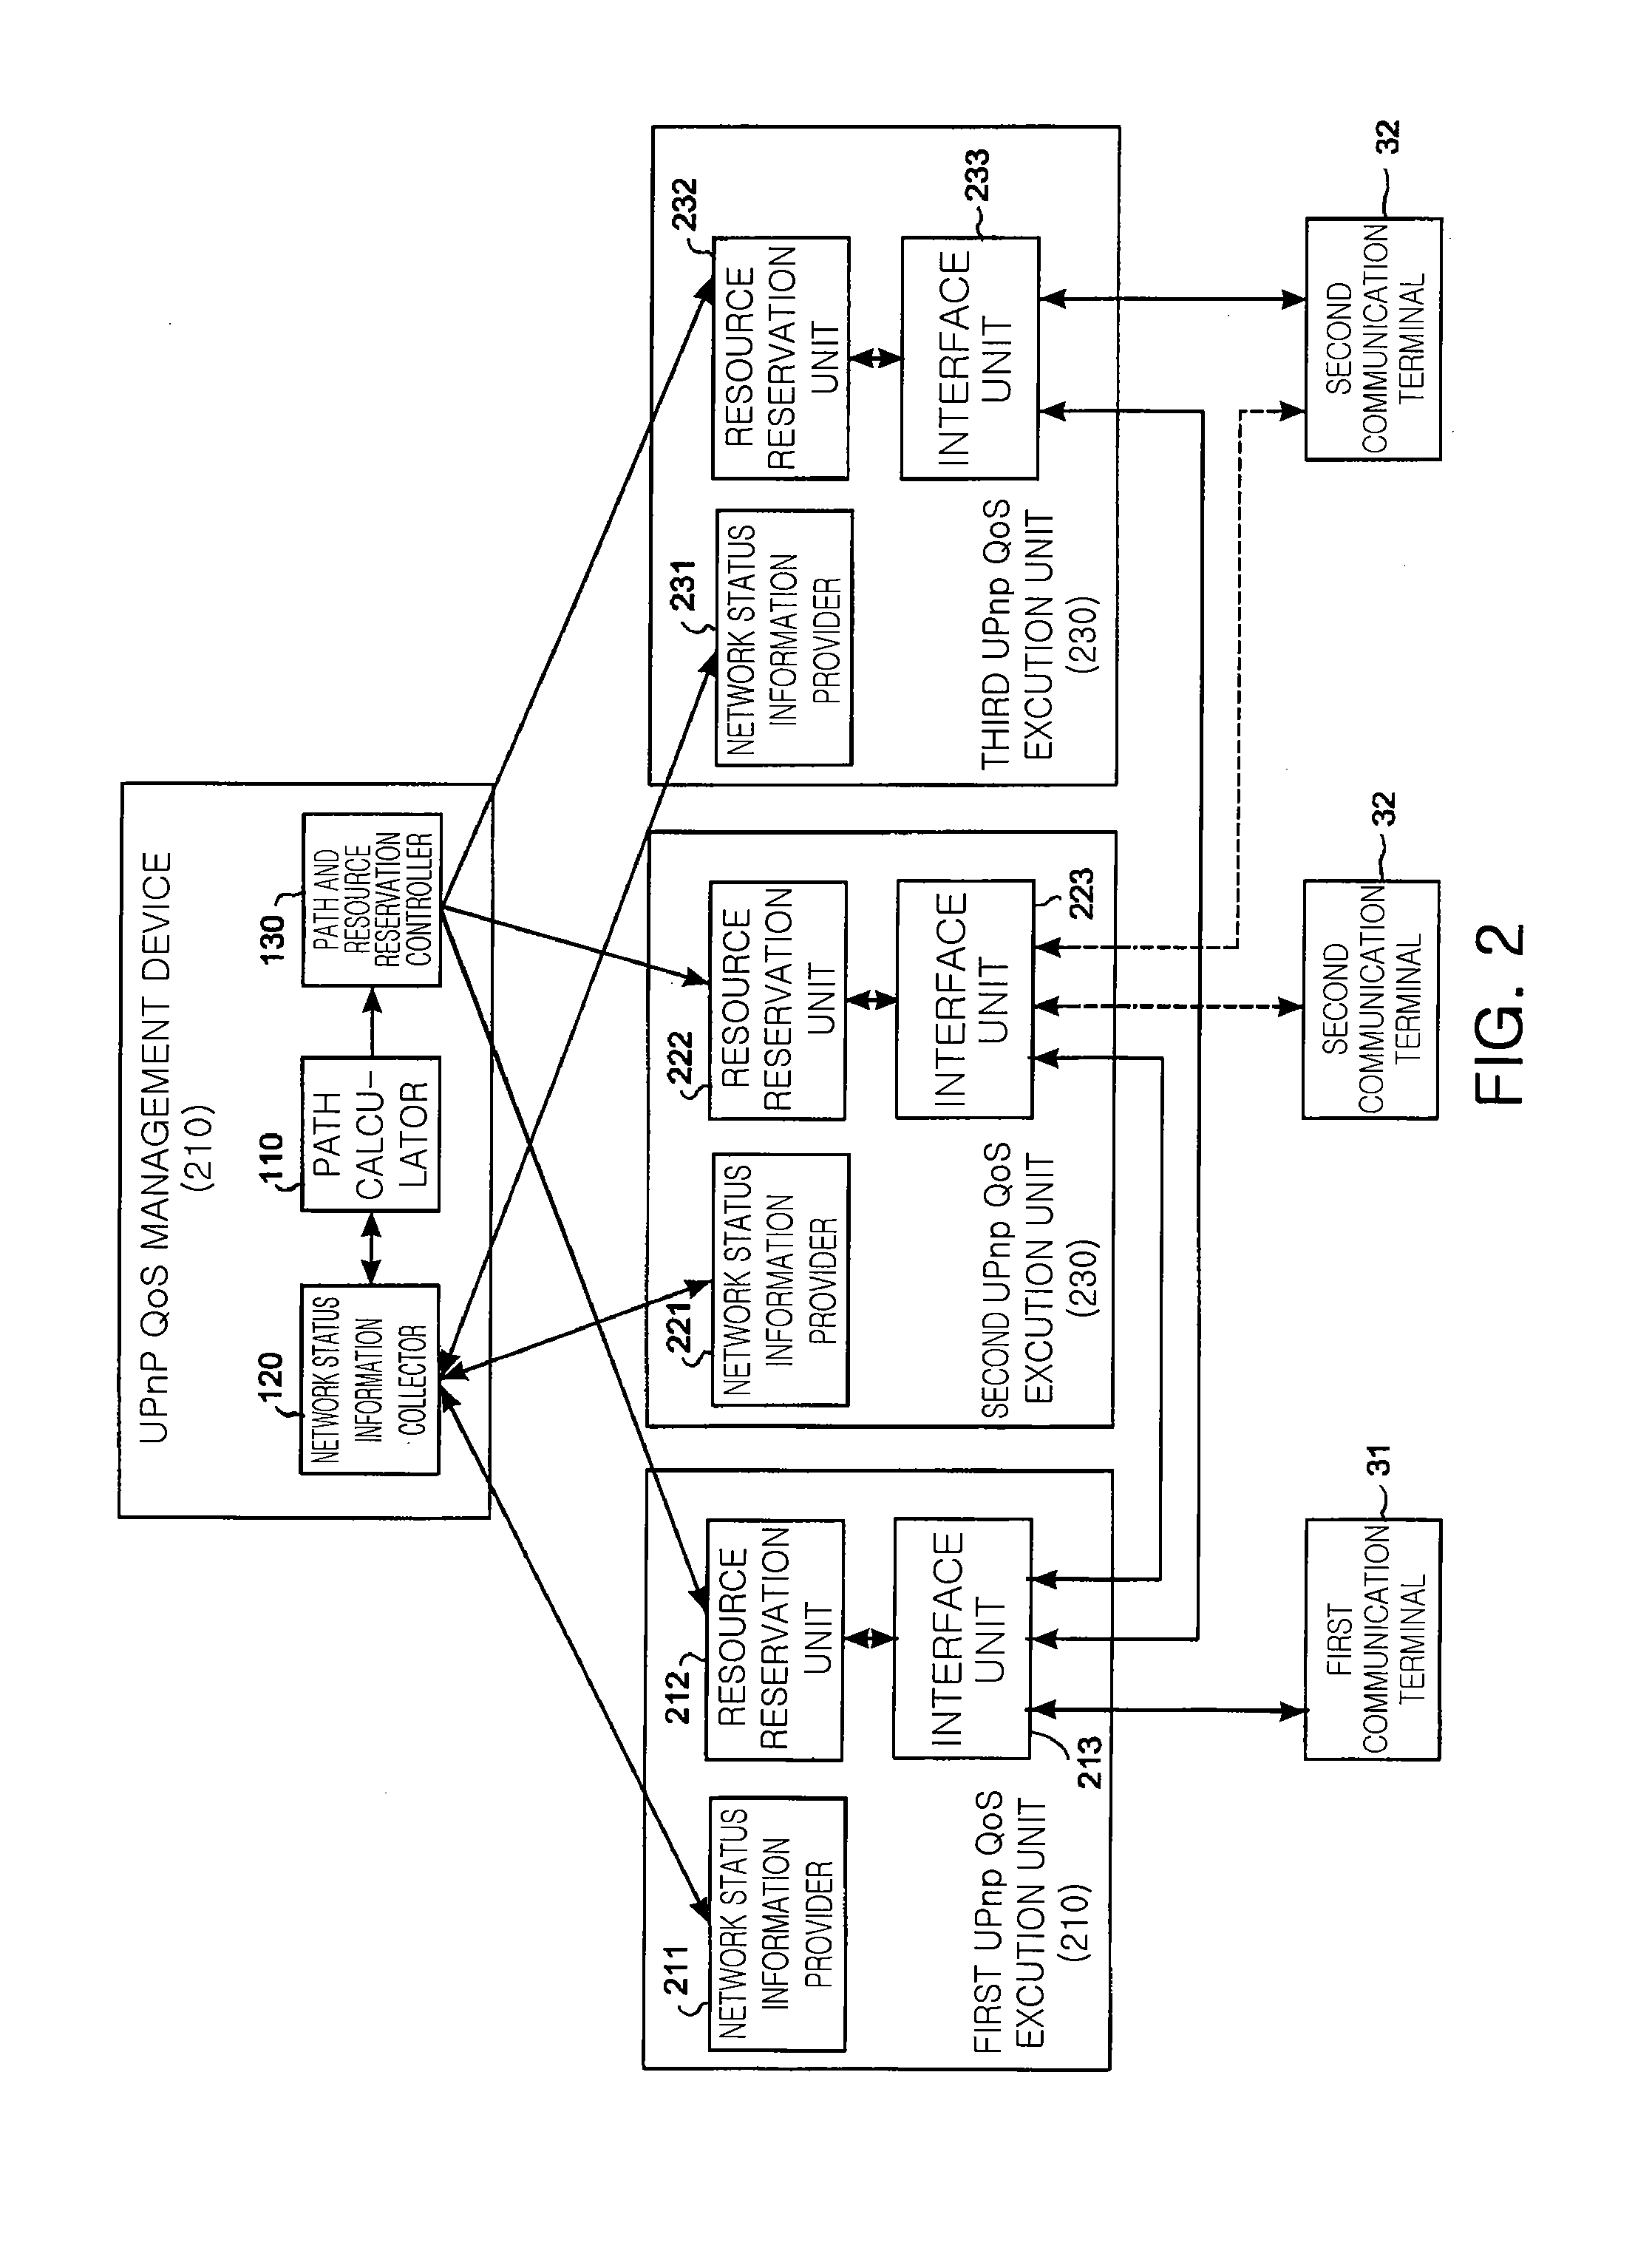 UPnP QoS NETWORK SYSTEM AND METHOD FOR RESERVING PATH AND RESOURCE